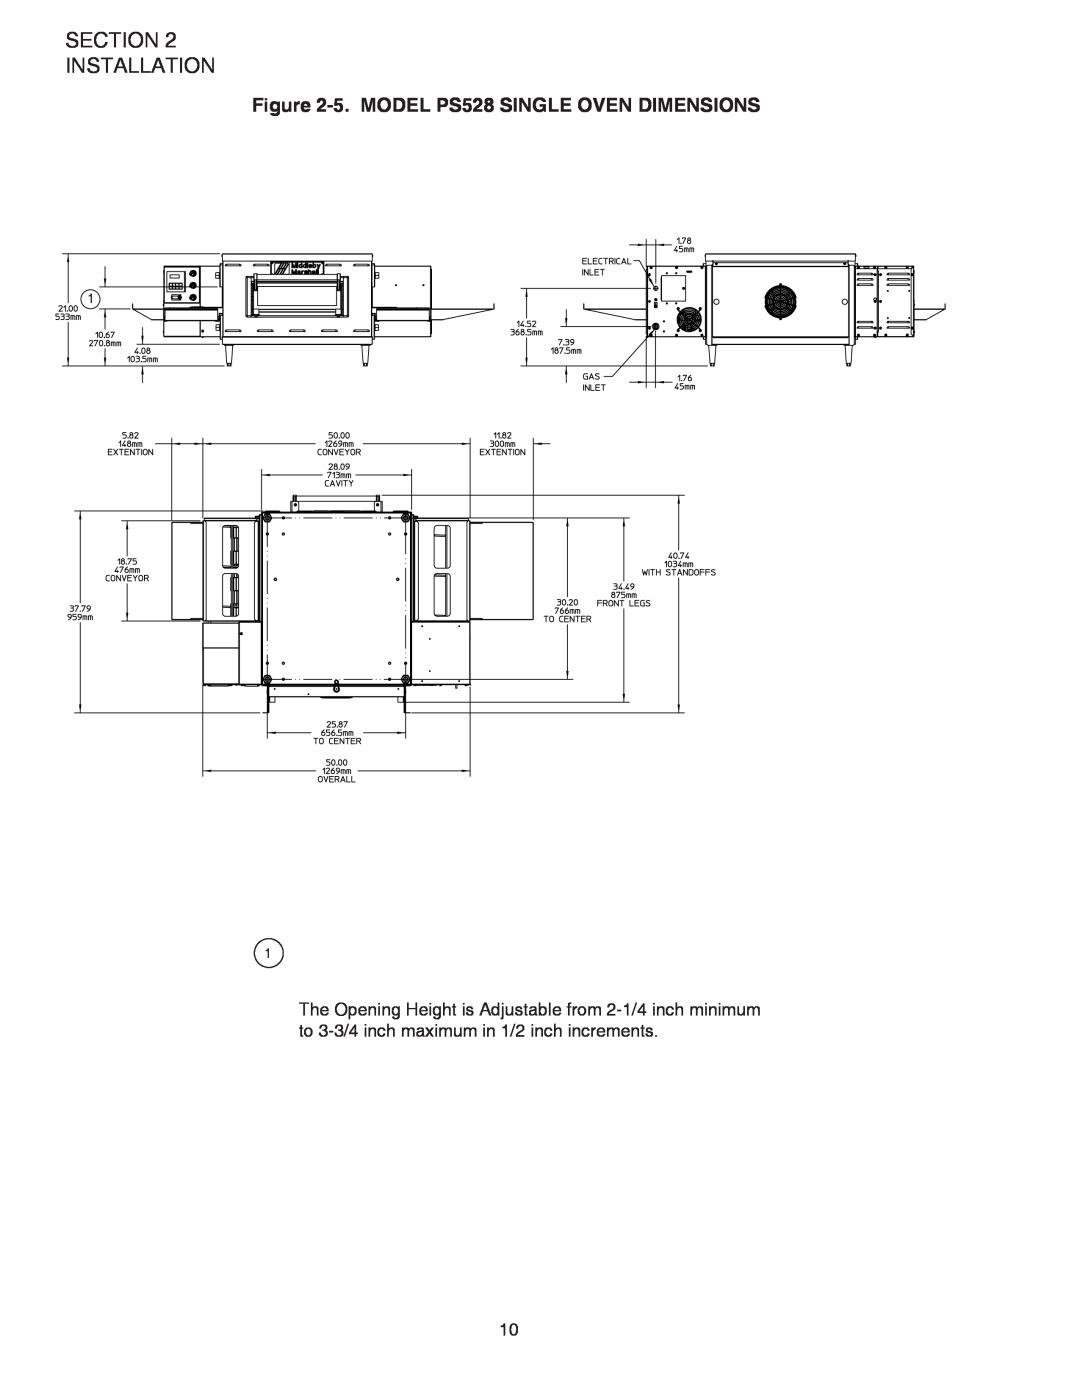 Middleby Marshall PS528G installation manual Section Installation, 5.MODEL PS528 SINGLE OVEN DIMENSIONS 